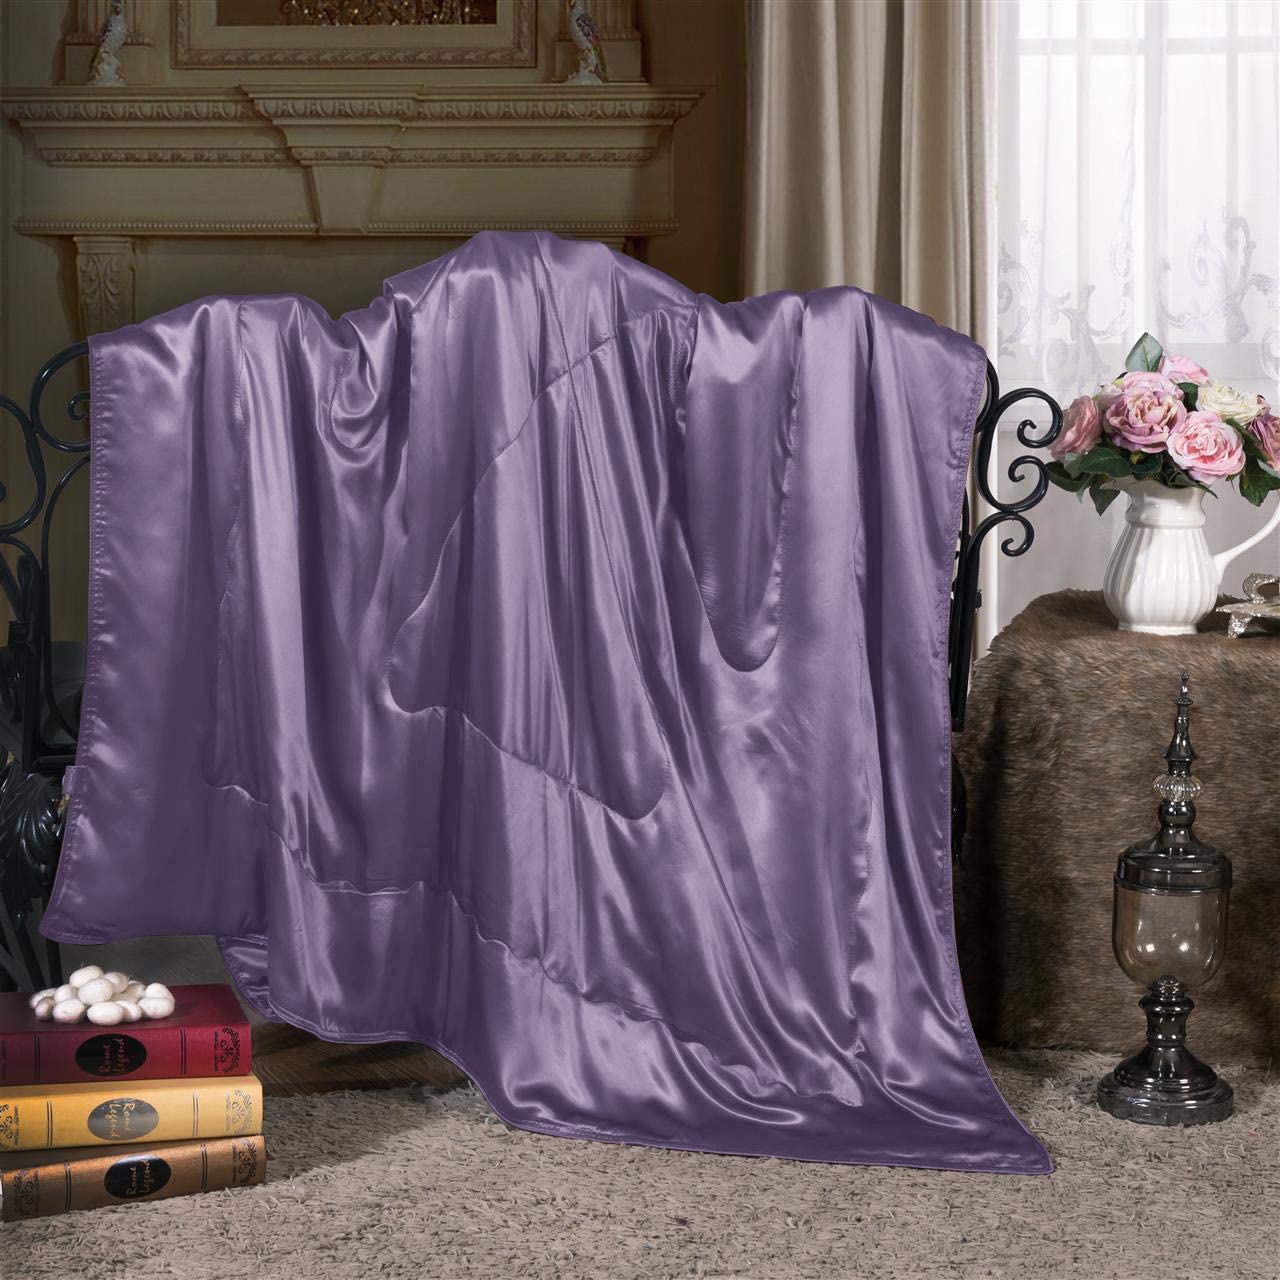 thumbnail 8 - Cozysilk Pure Silk Throw Blanket, 100% Mulberry Silk Inside and Outside, Pure Si